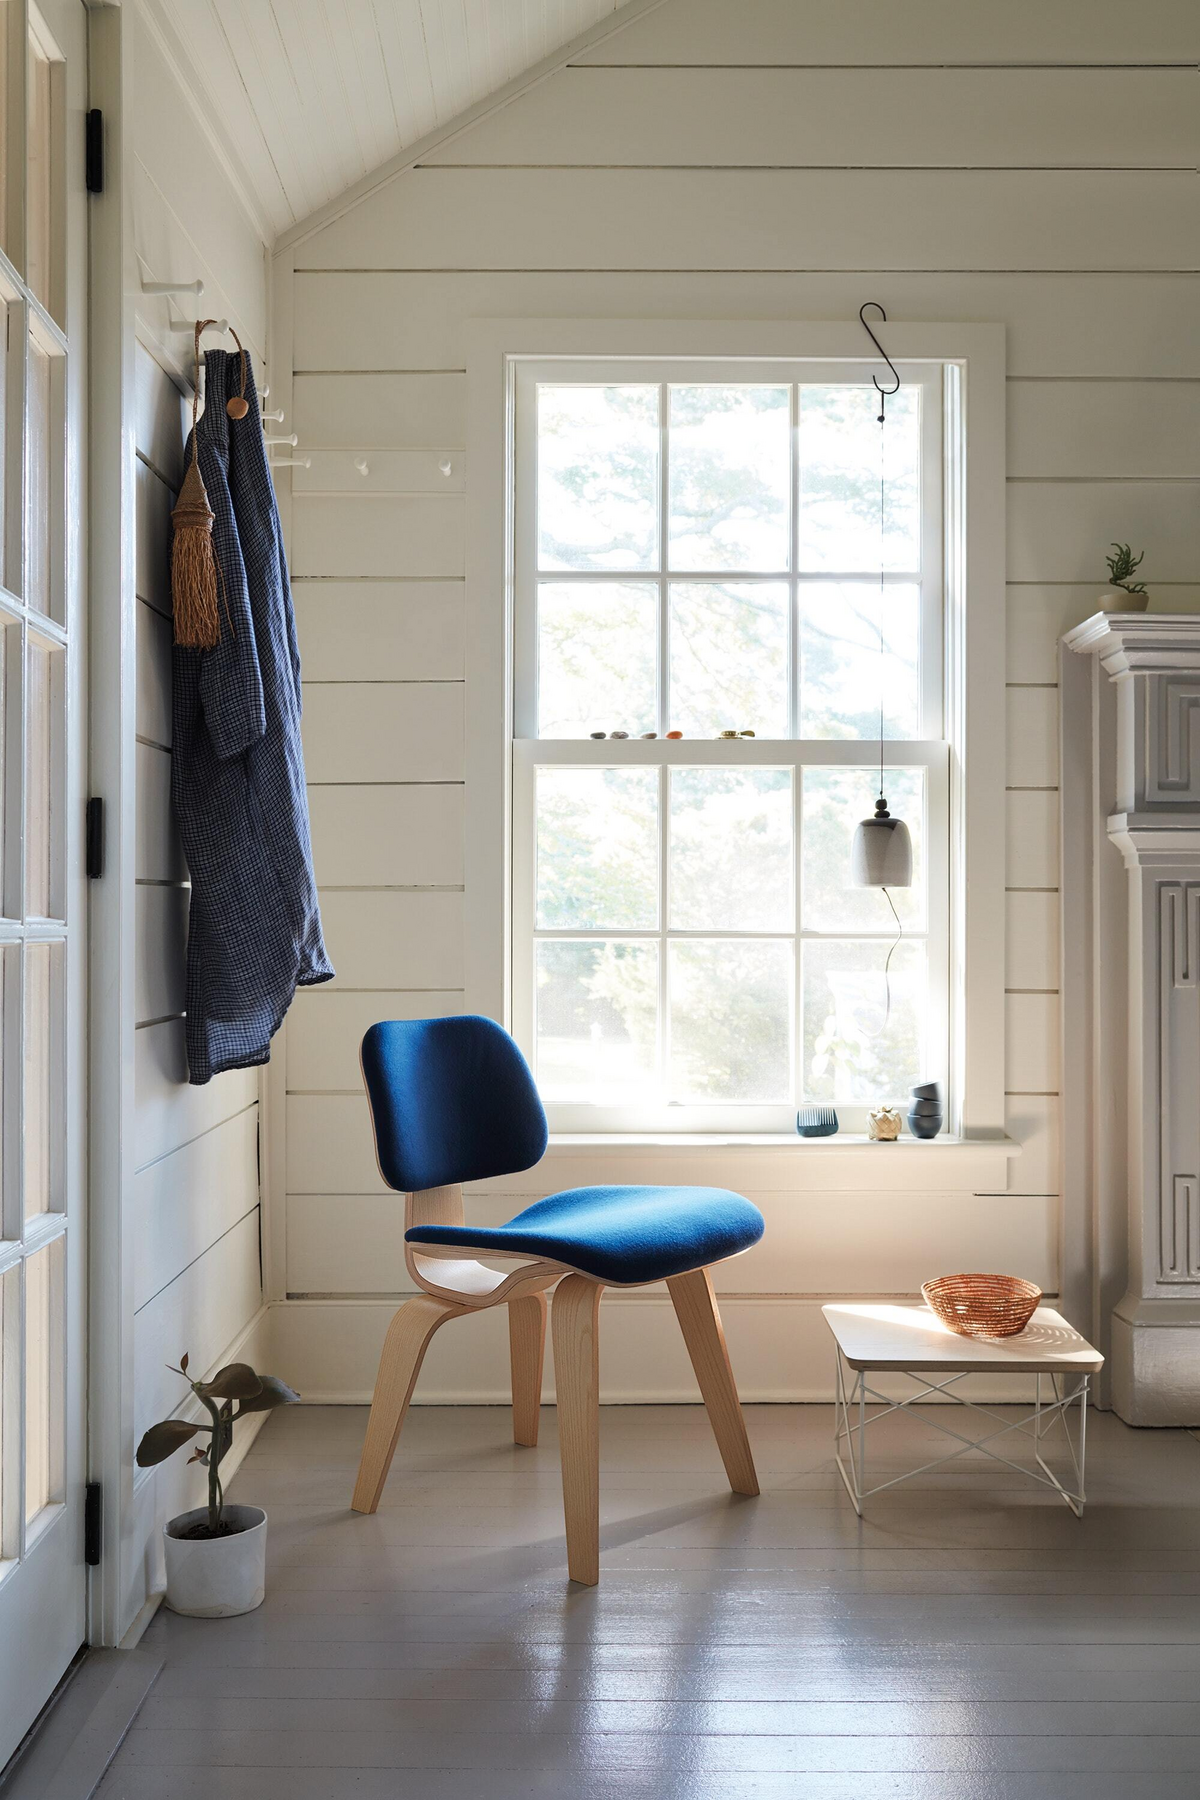 Wooden chair with blue upholstery in a neutral colored corner